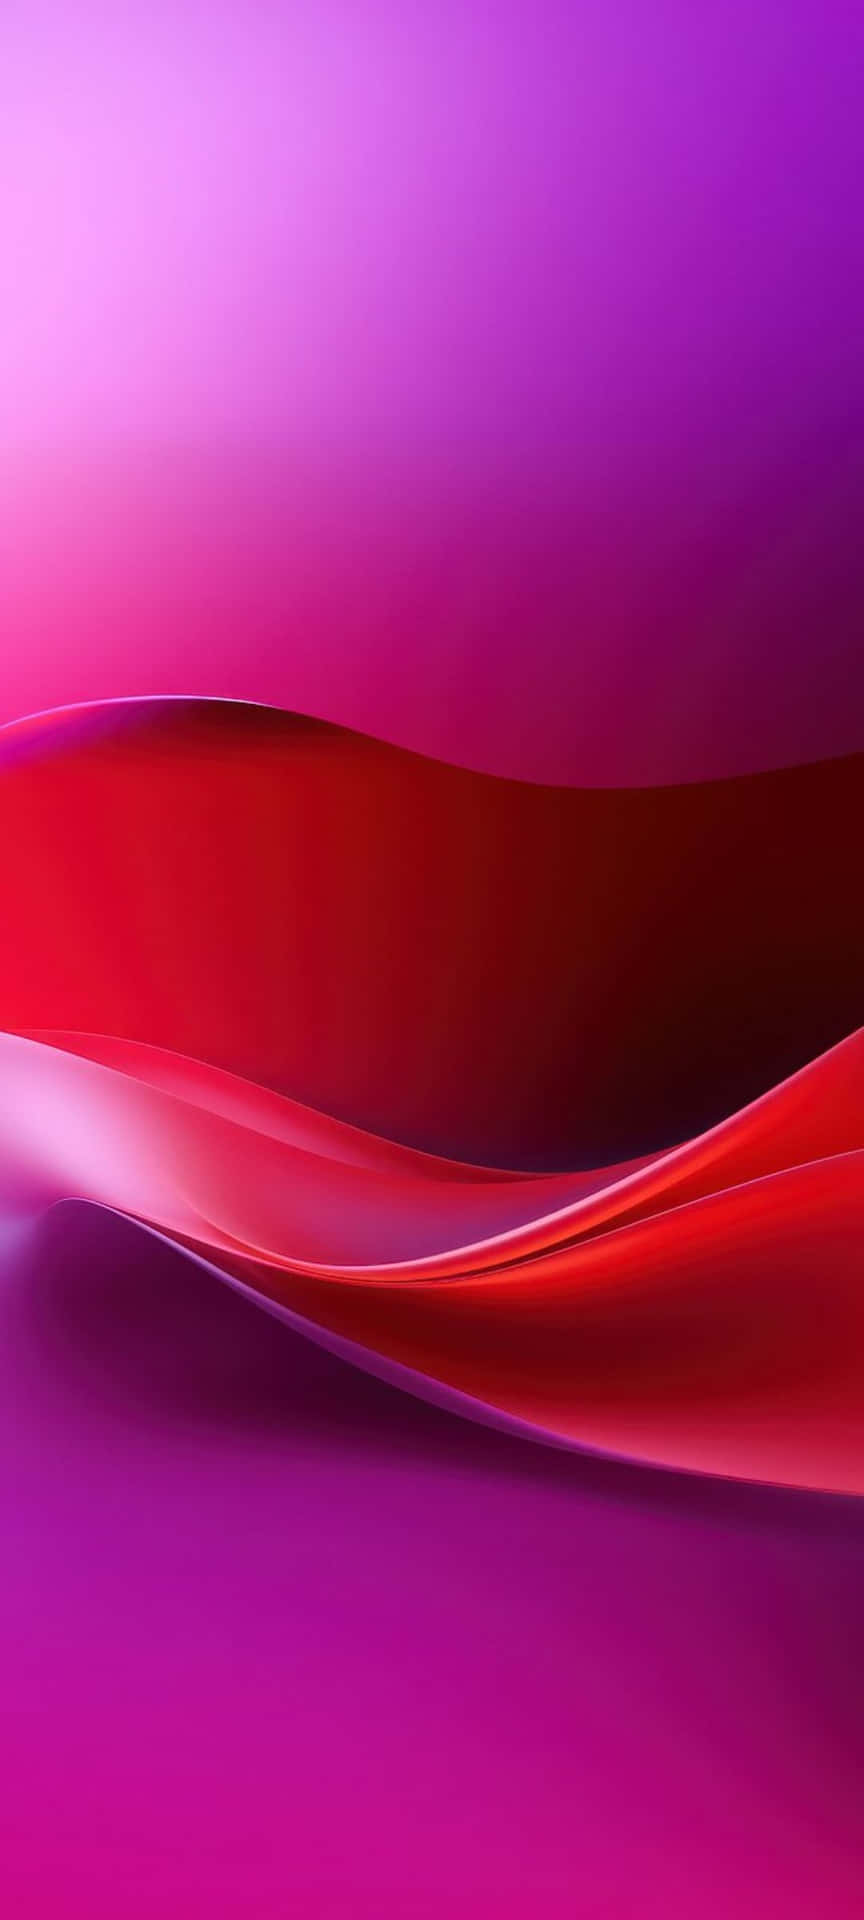 Abstract Purpleand Red Waves Background Wallpaper